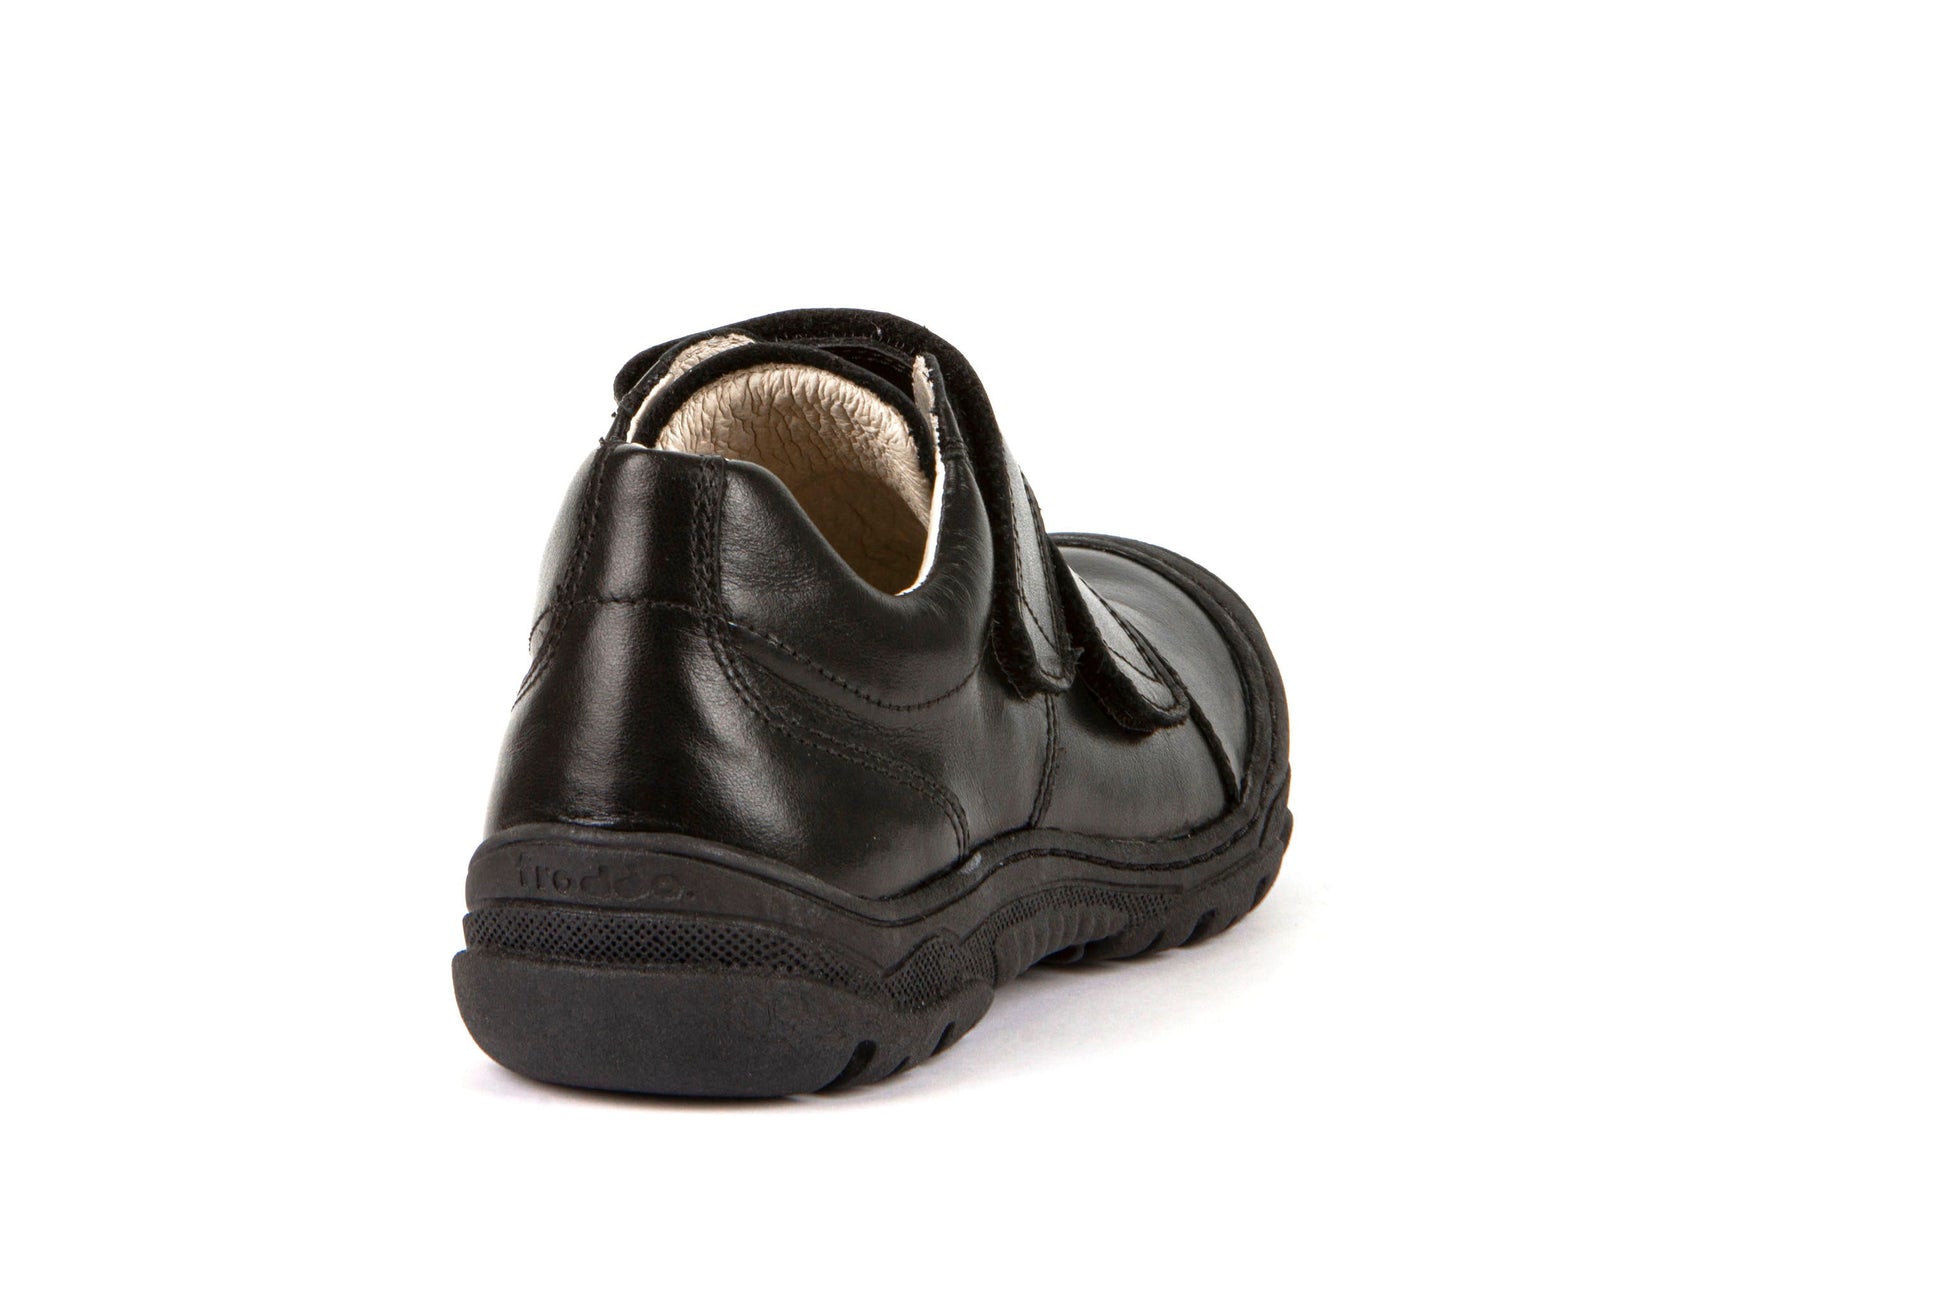 A boys school shoe by Froddo, style G3130188 Leo, in black leather with double velcro fastening. Angled view.